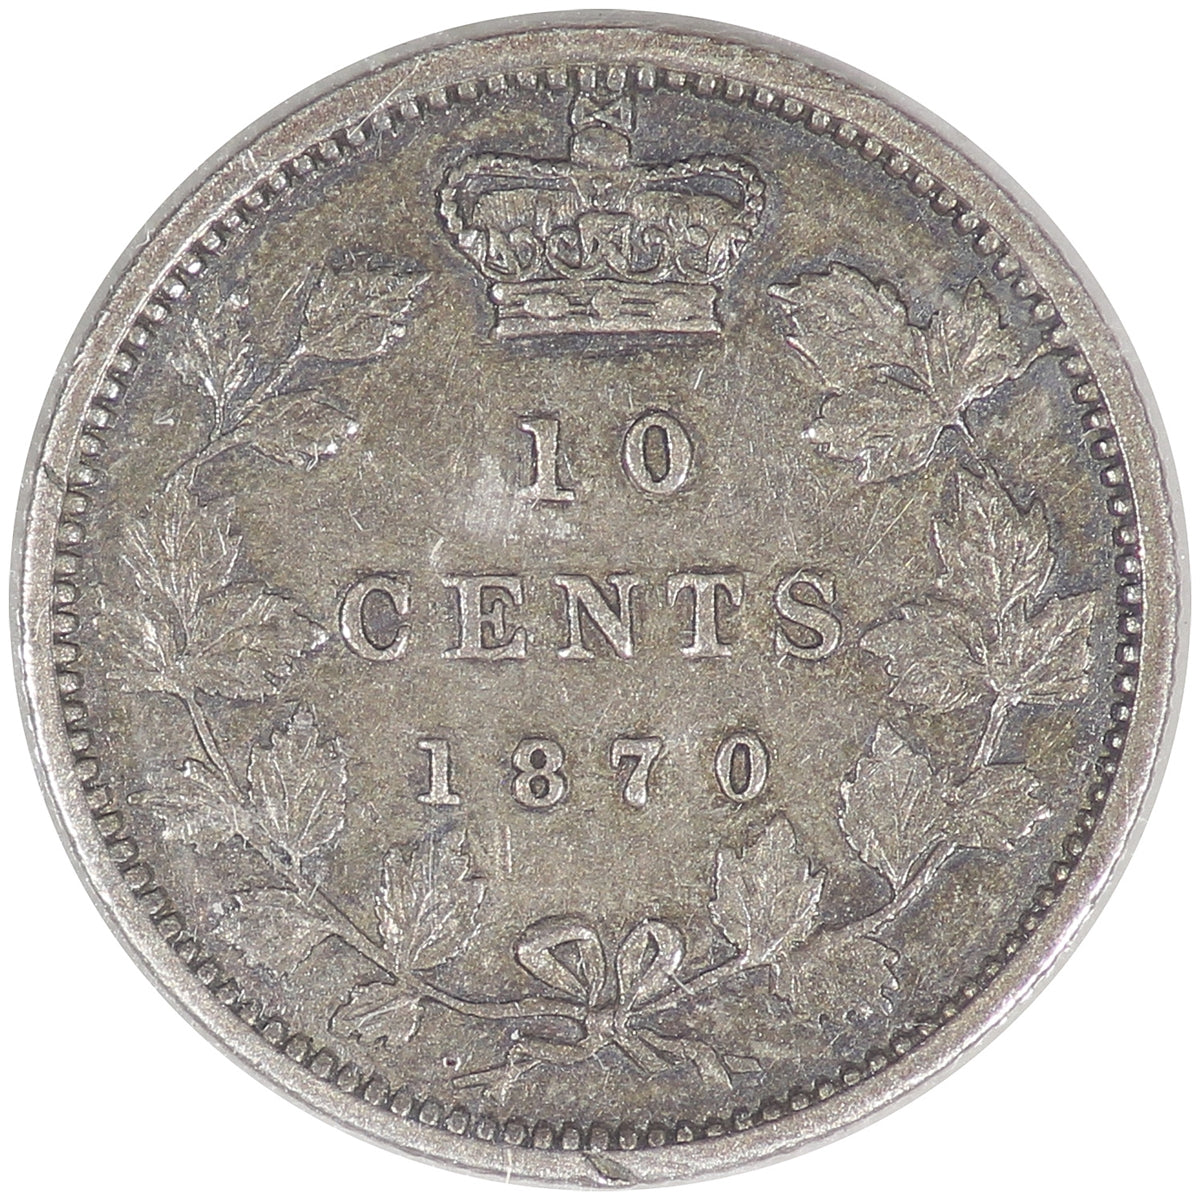 1870 Narrow 0 Canada 10-cents ICCS Certified VF-20